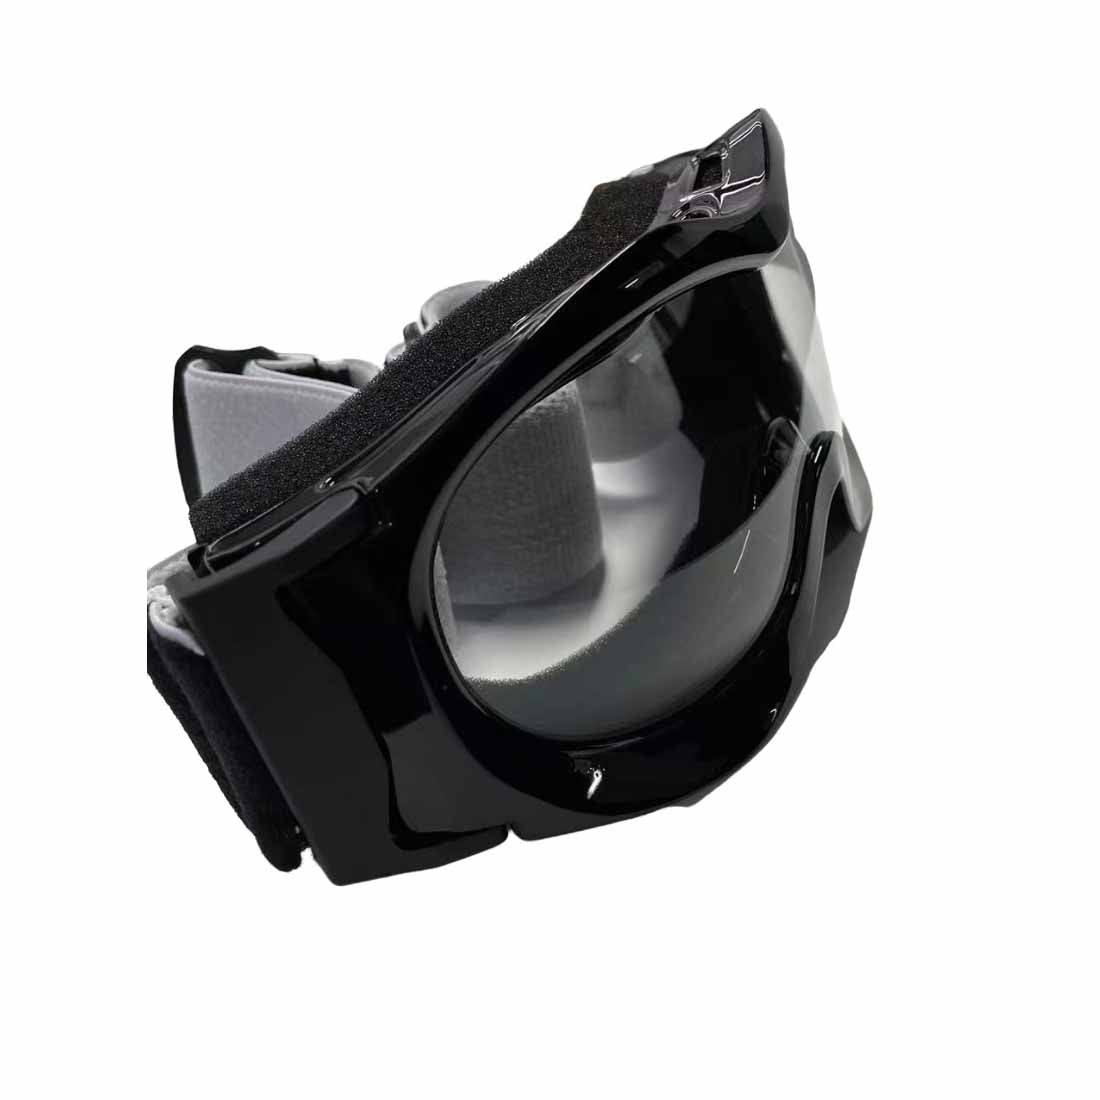 Kids Black Goggles Eye Protection For Outdoor Motor Sports Cycling Skateboarding - TDRMOTO